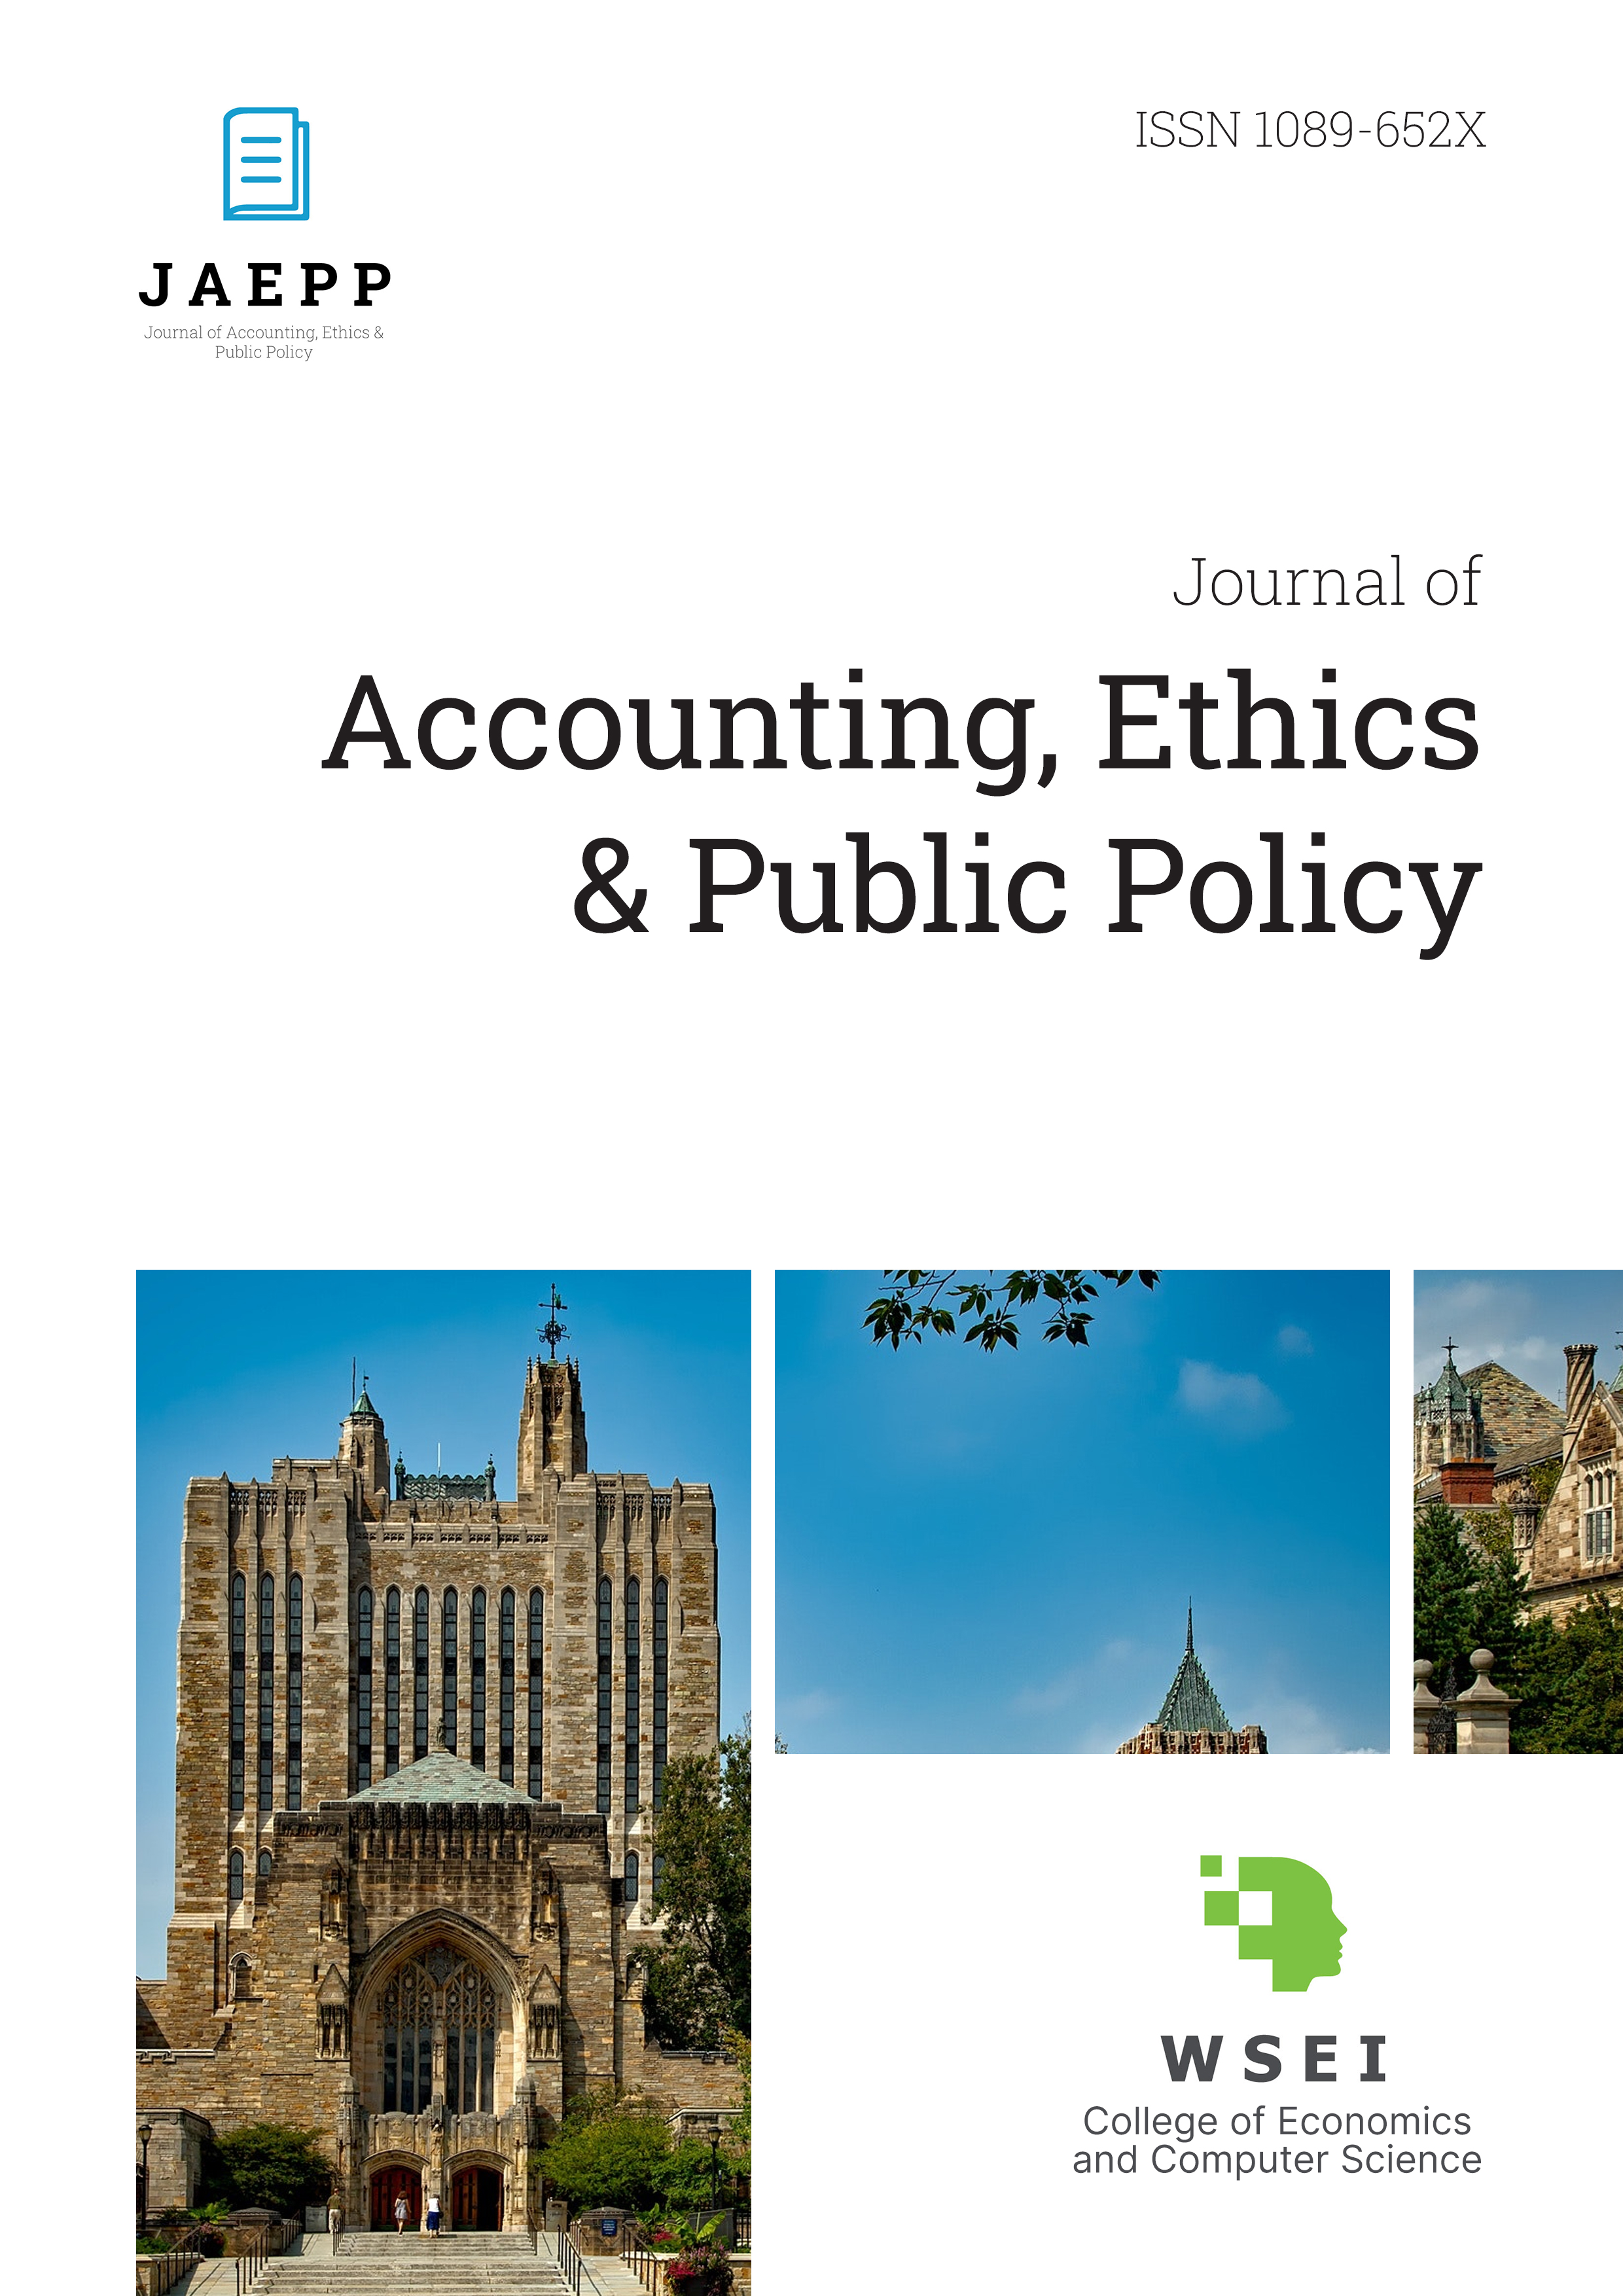 					View Vol. 20 No. 2 (2019): Journal of Accounting, Ethics & Public Policy, JAEPP
				